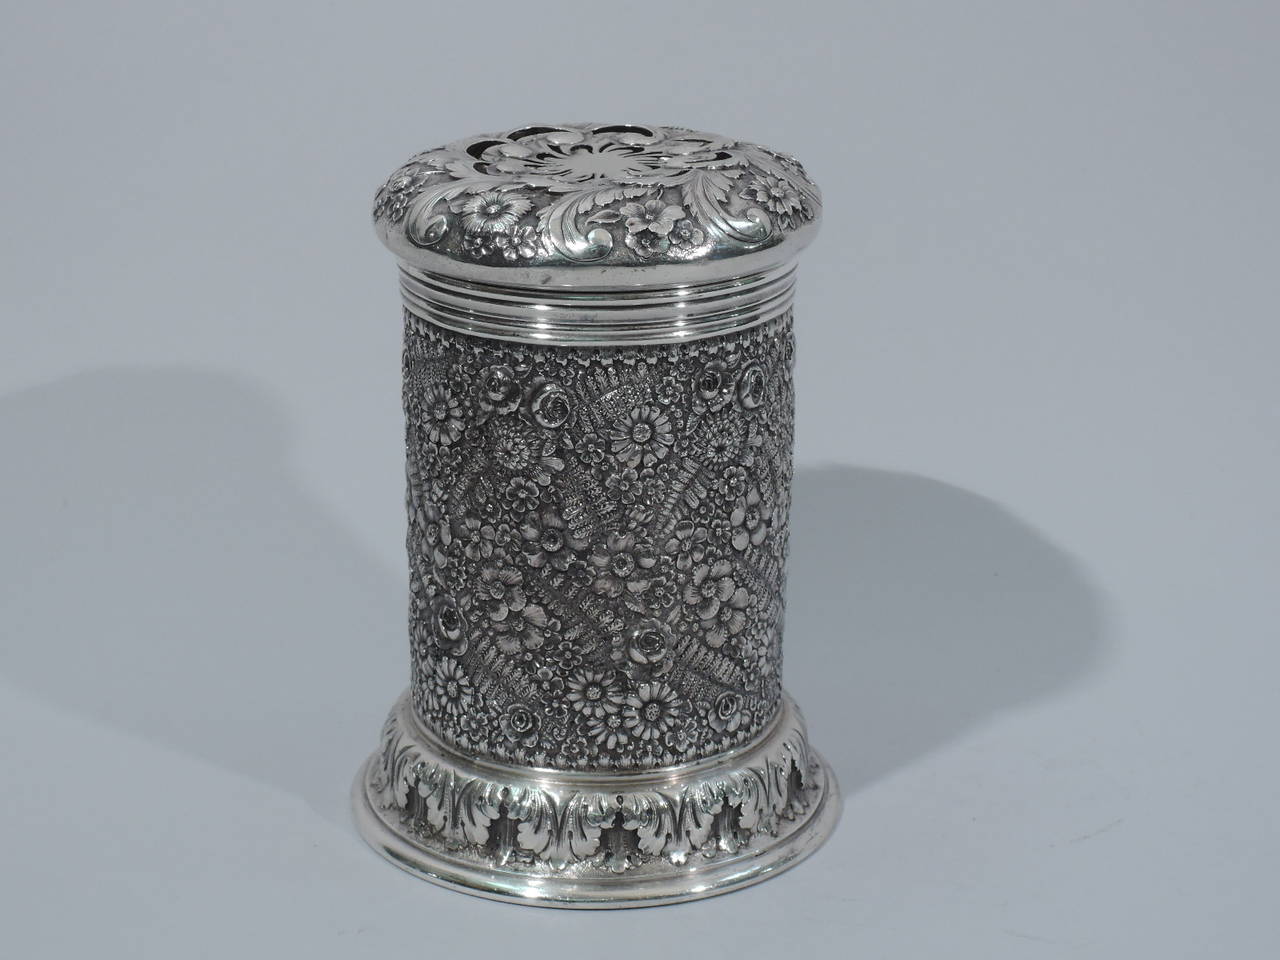 Unusual sterling silver shaker. Made by Tiffany & Co. in New York, ca. 1887. Cylindrical with spread foot and bun cover. Dense repousse with flowers and ferns. Acanthus leaf border to foot. Reeded rim. Cover has scrolled piercing bordered by